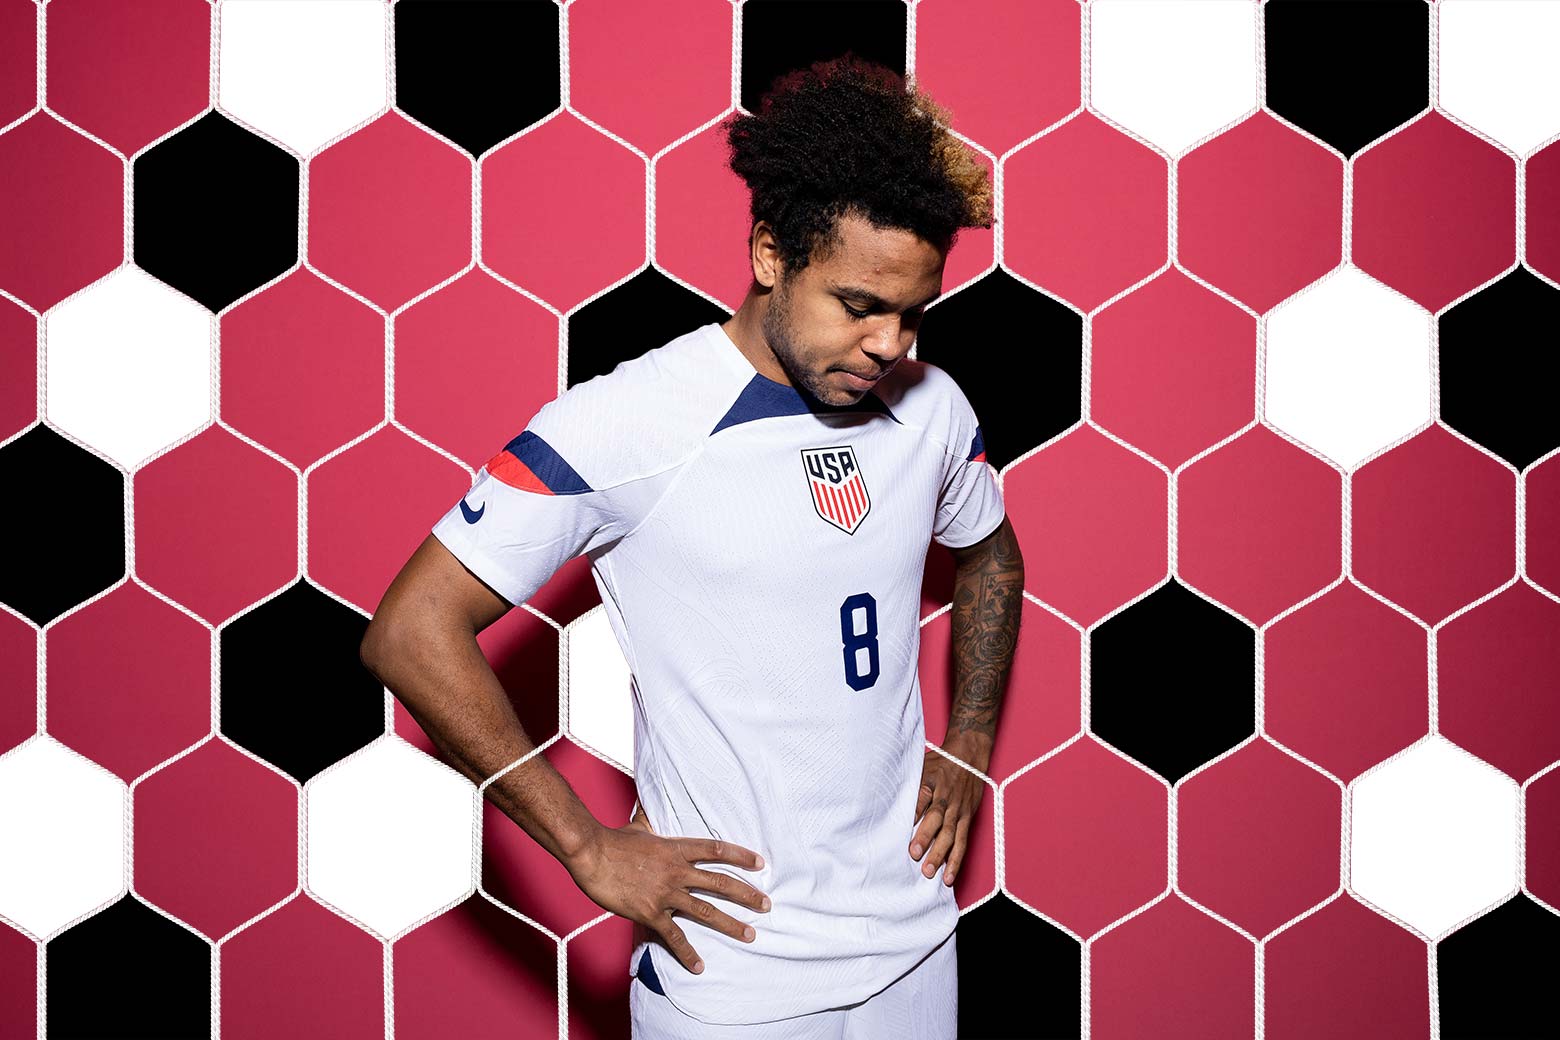 McKennie, arms akimbo, looking down at the ground, the octagonal grid of a soccer net illustrated in a scrim behind him.